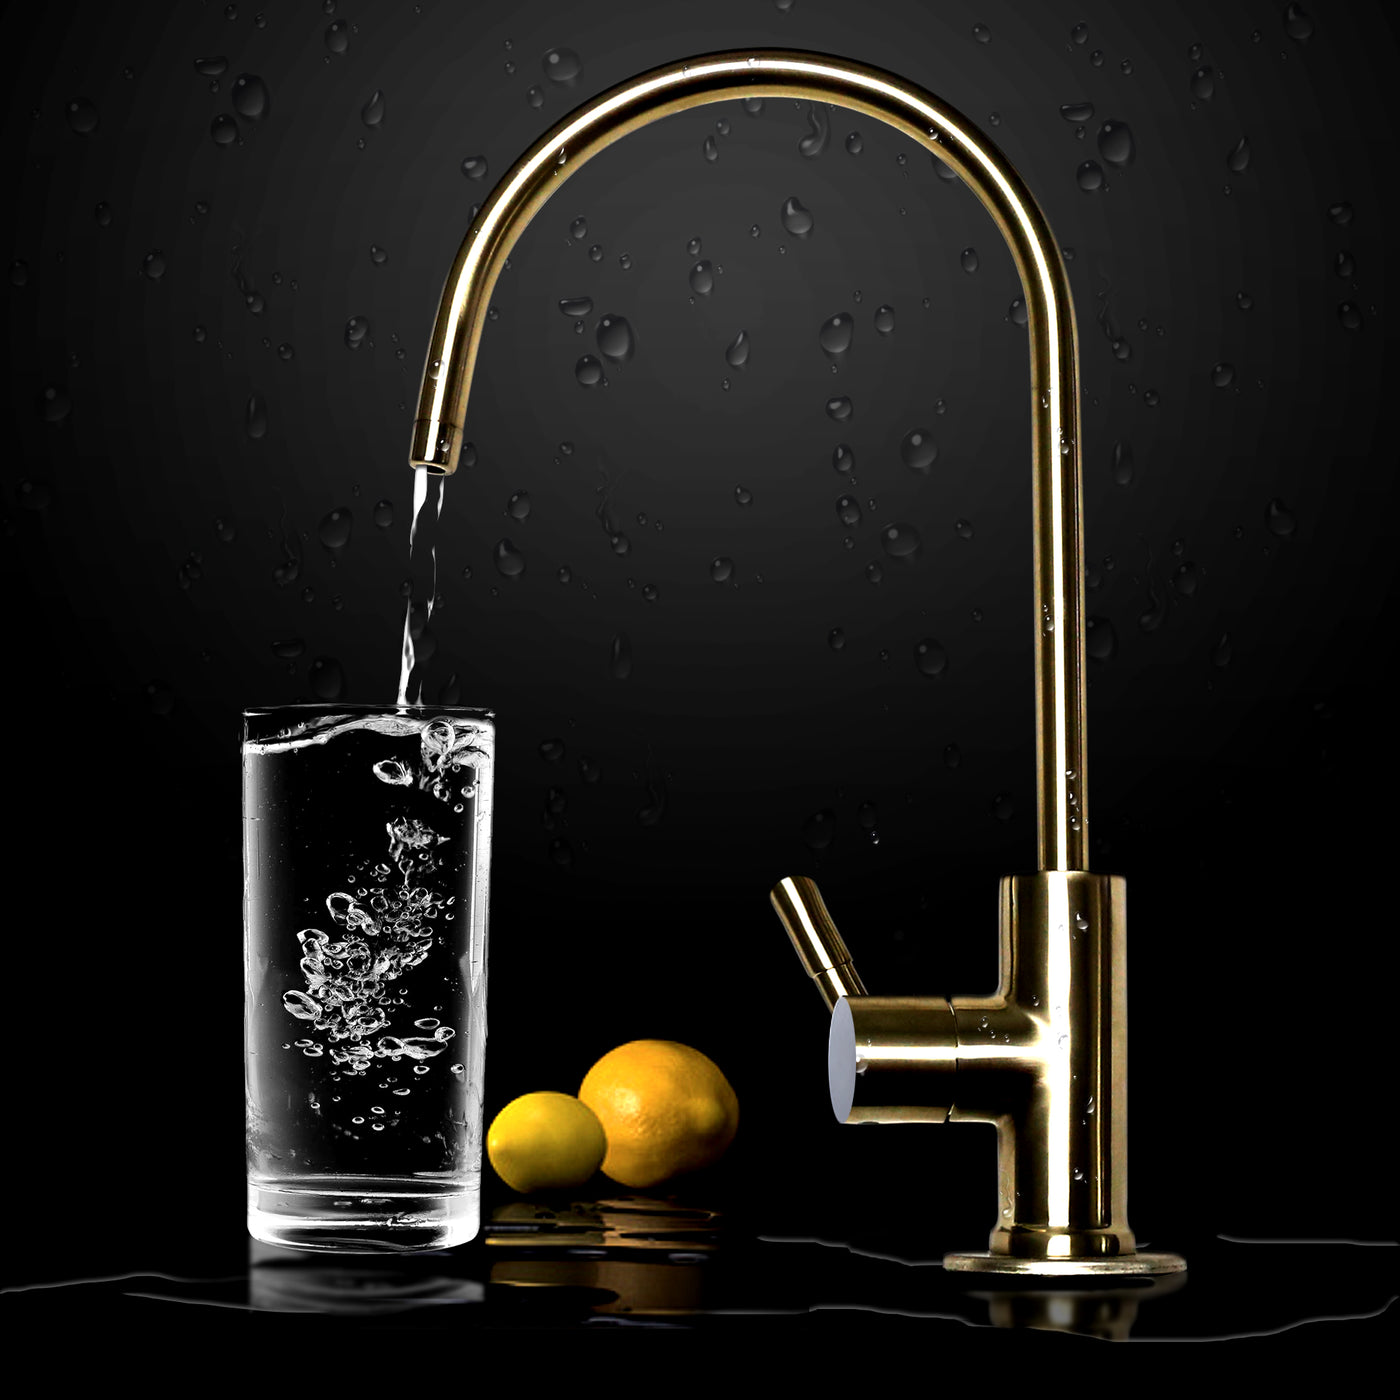 Drink Clean Water - Faucet Tap Filter